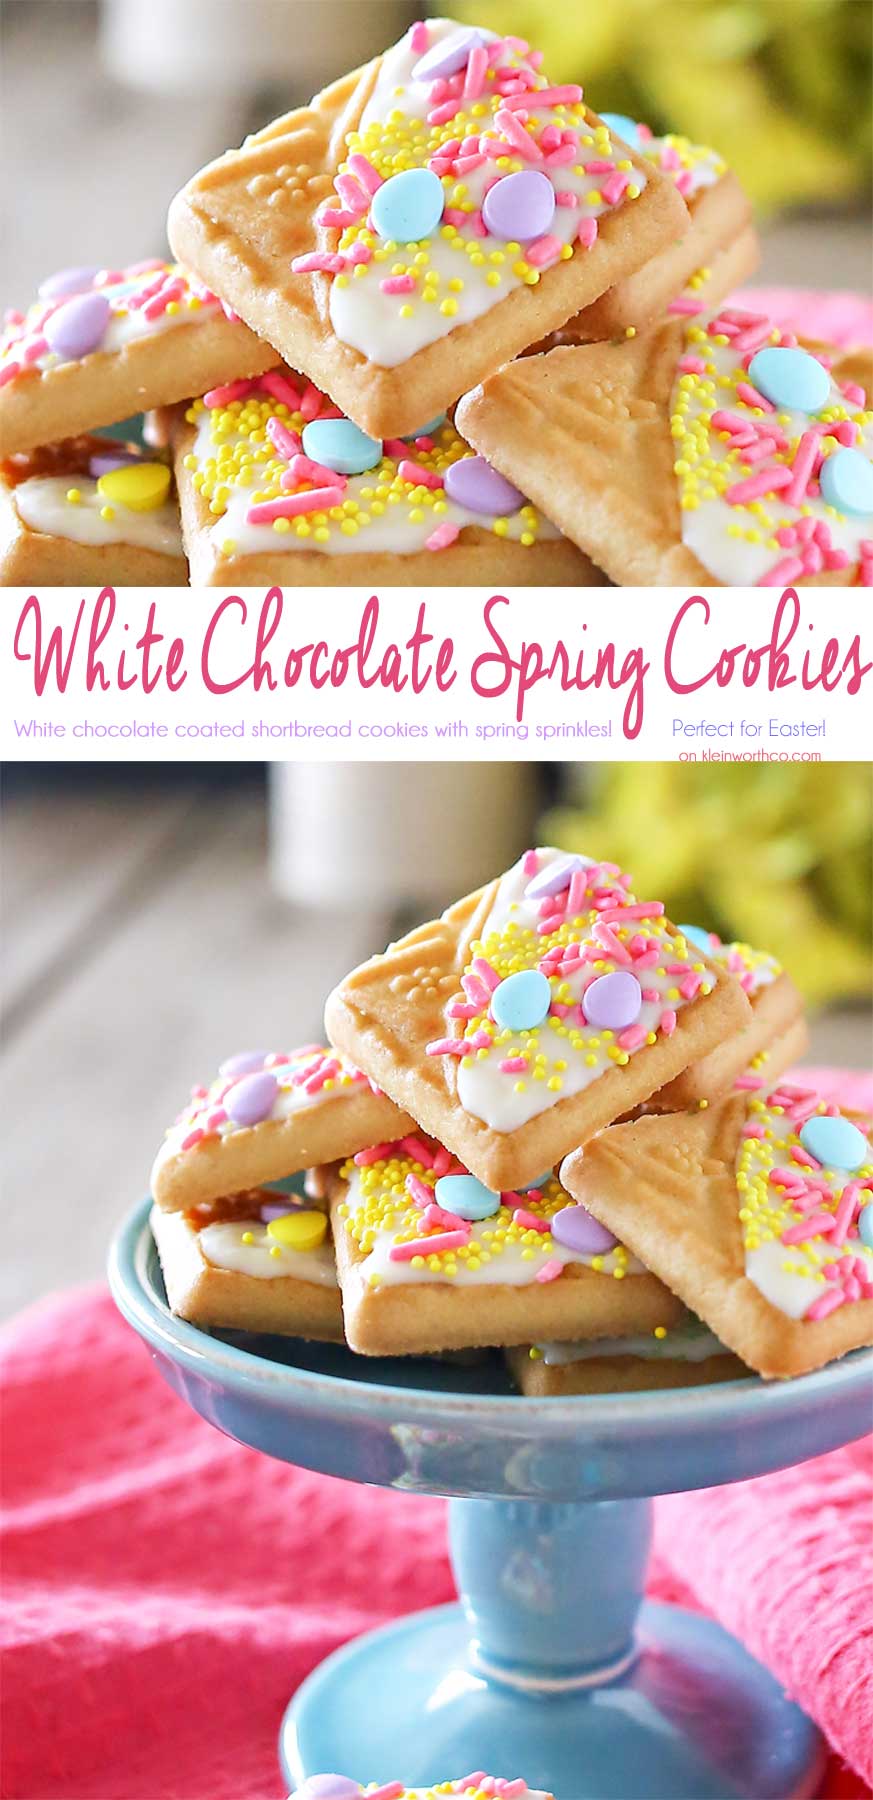 Looking for a quick little treat to serve at all your Easter gatherings? Creating cute treats like these White Chocolate Spring Cookies for Easter is easy. Simple shortbread cookies, white chocolate & Easter sprinkles is so much fun! These literally take about 15 minutes to make & everyone just loves them. People will think you slaved away in the kitchen for hours. They are an adorable Easter dessert that bring BIG smiles! 